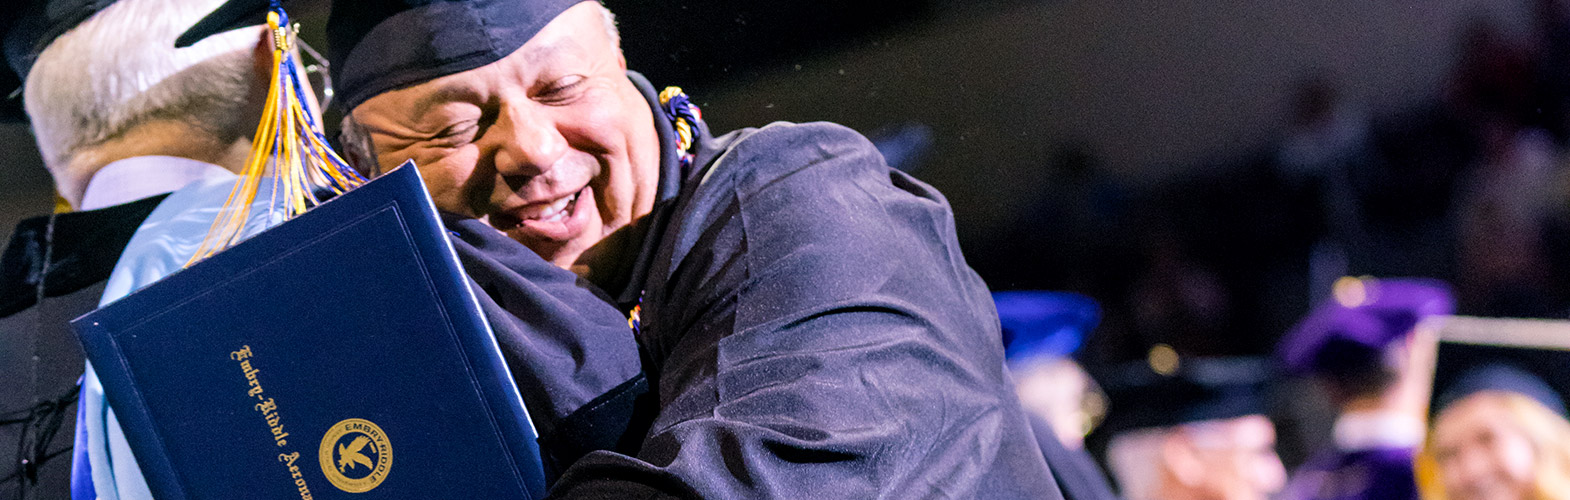 An excited Embry-Riddle student receiving his diploma at graduation